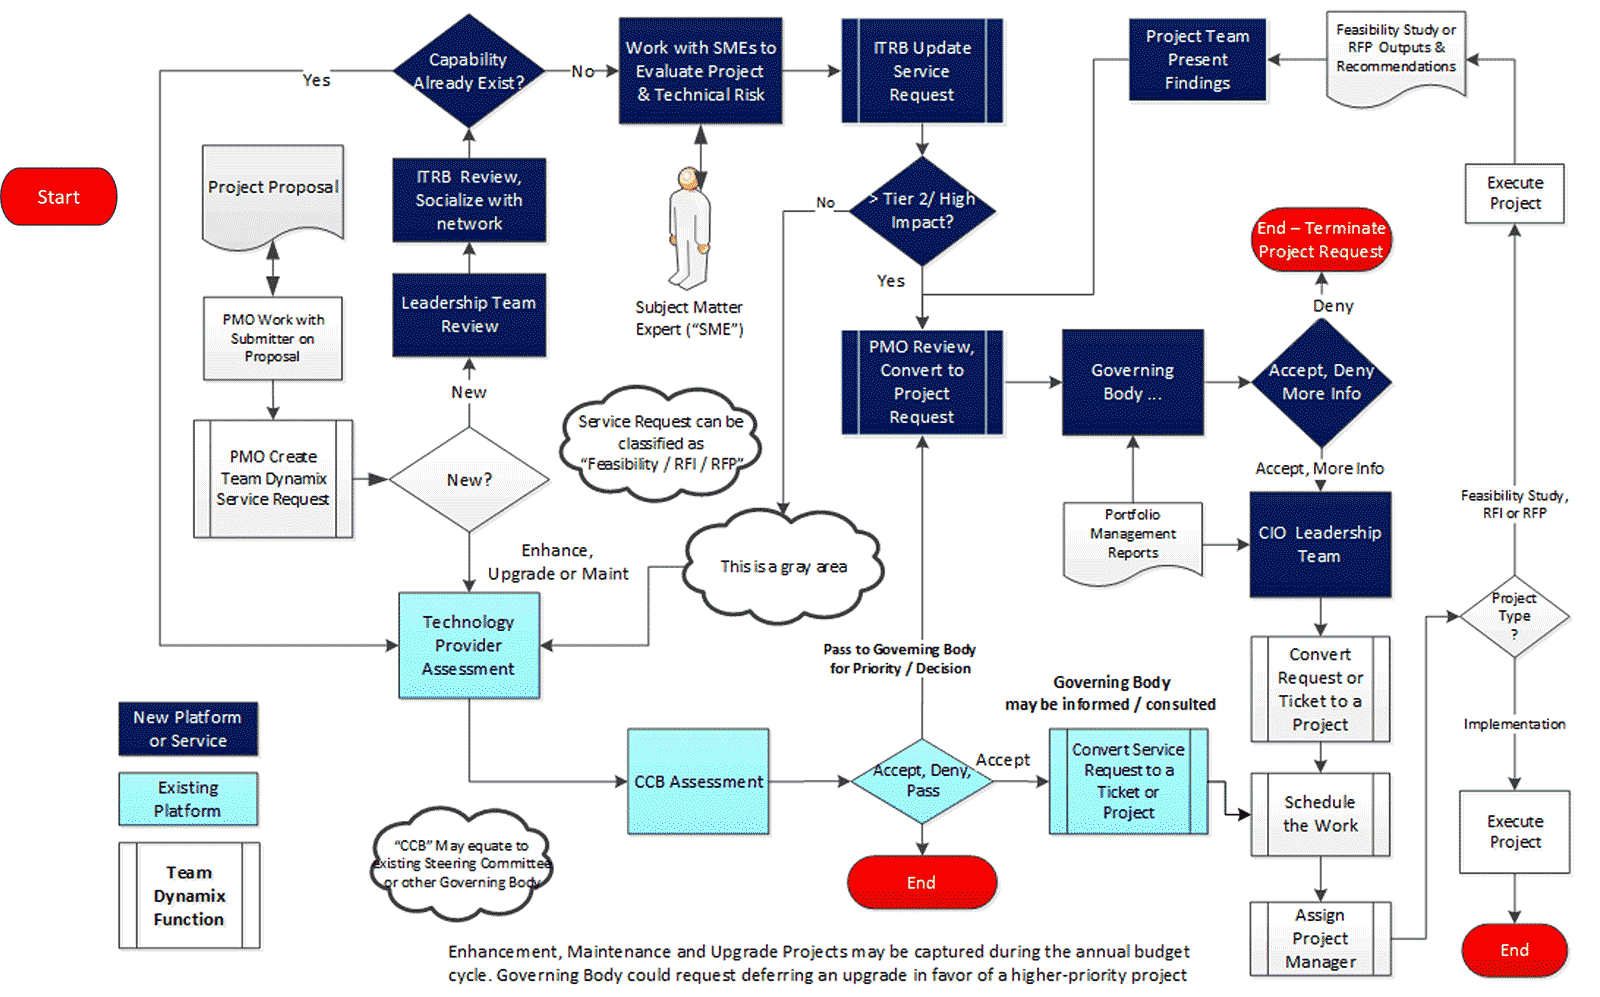 An example project intake, approval, and prioritization flow chart without swim lanes is shown.